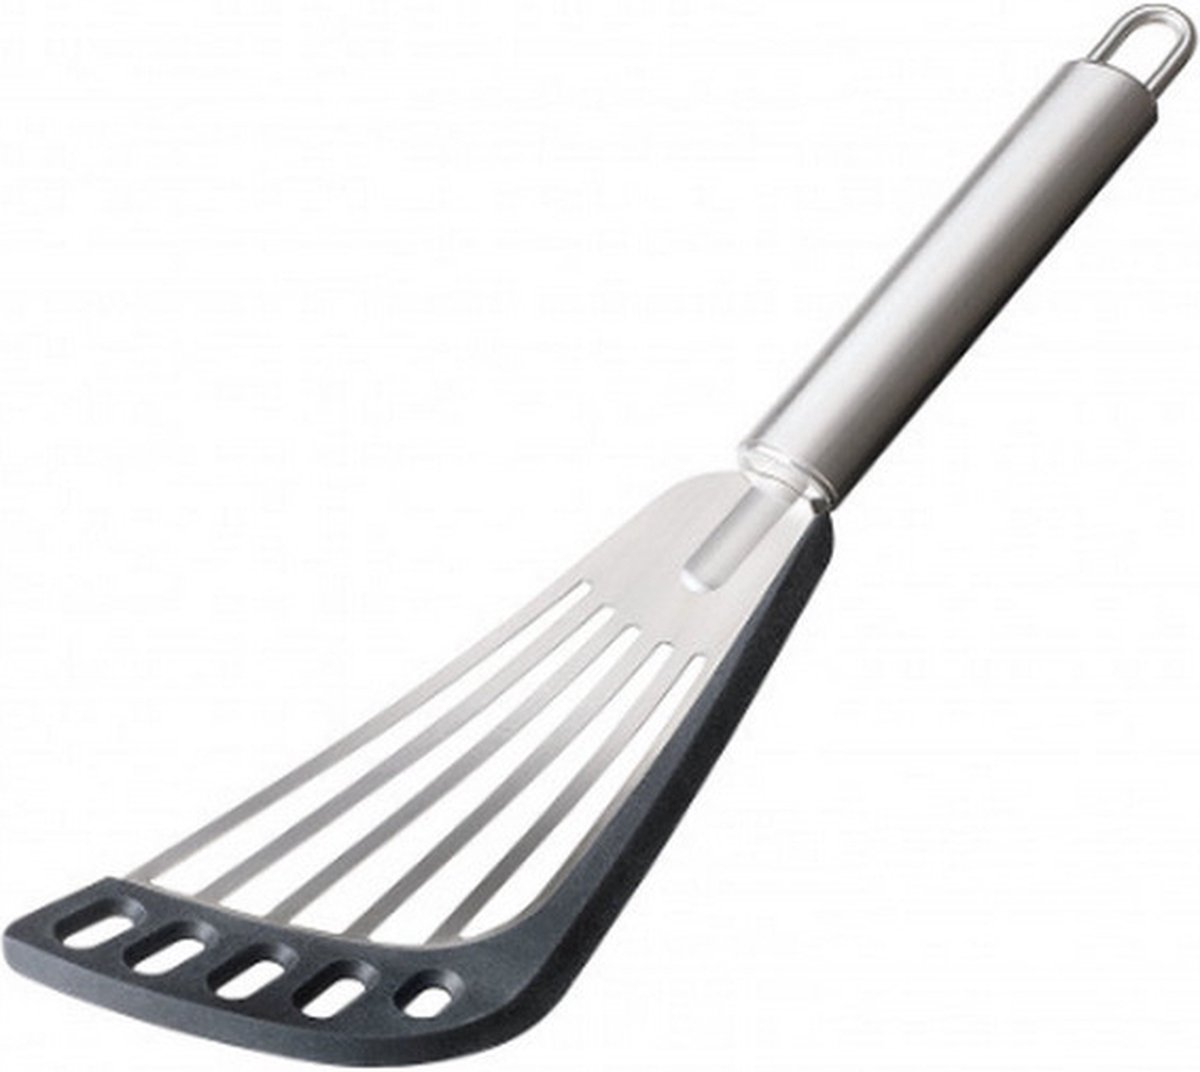 Moha Spatula, Stainless Steel, Silver, 8 X 30 X 10 Cm